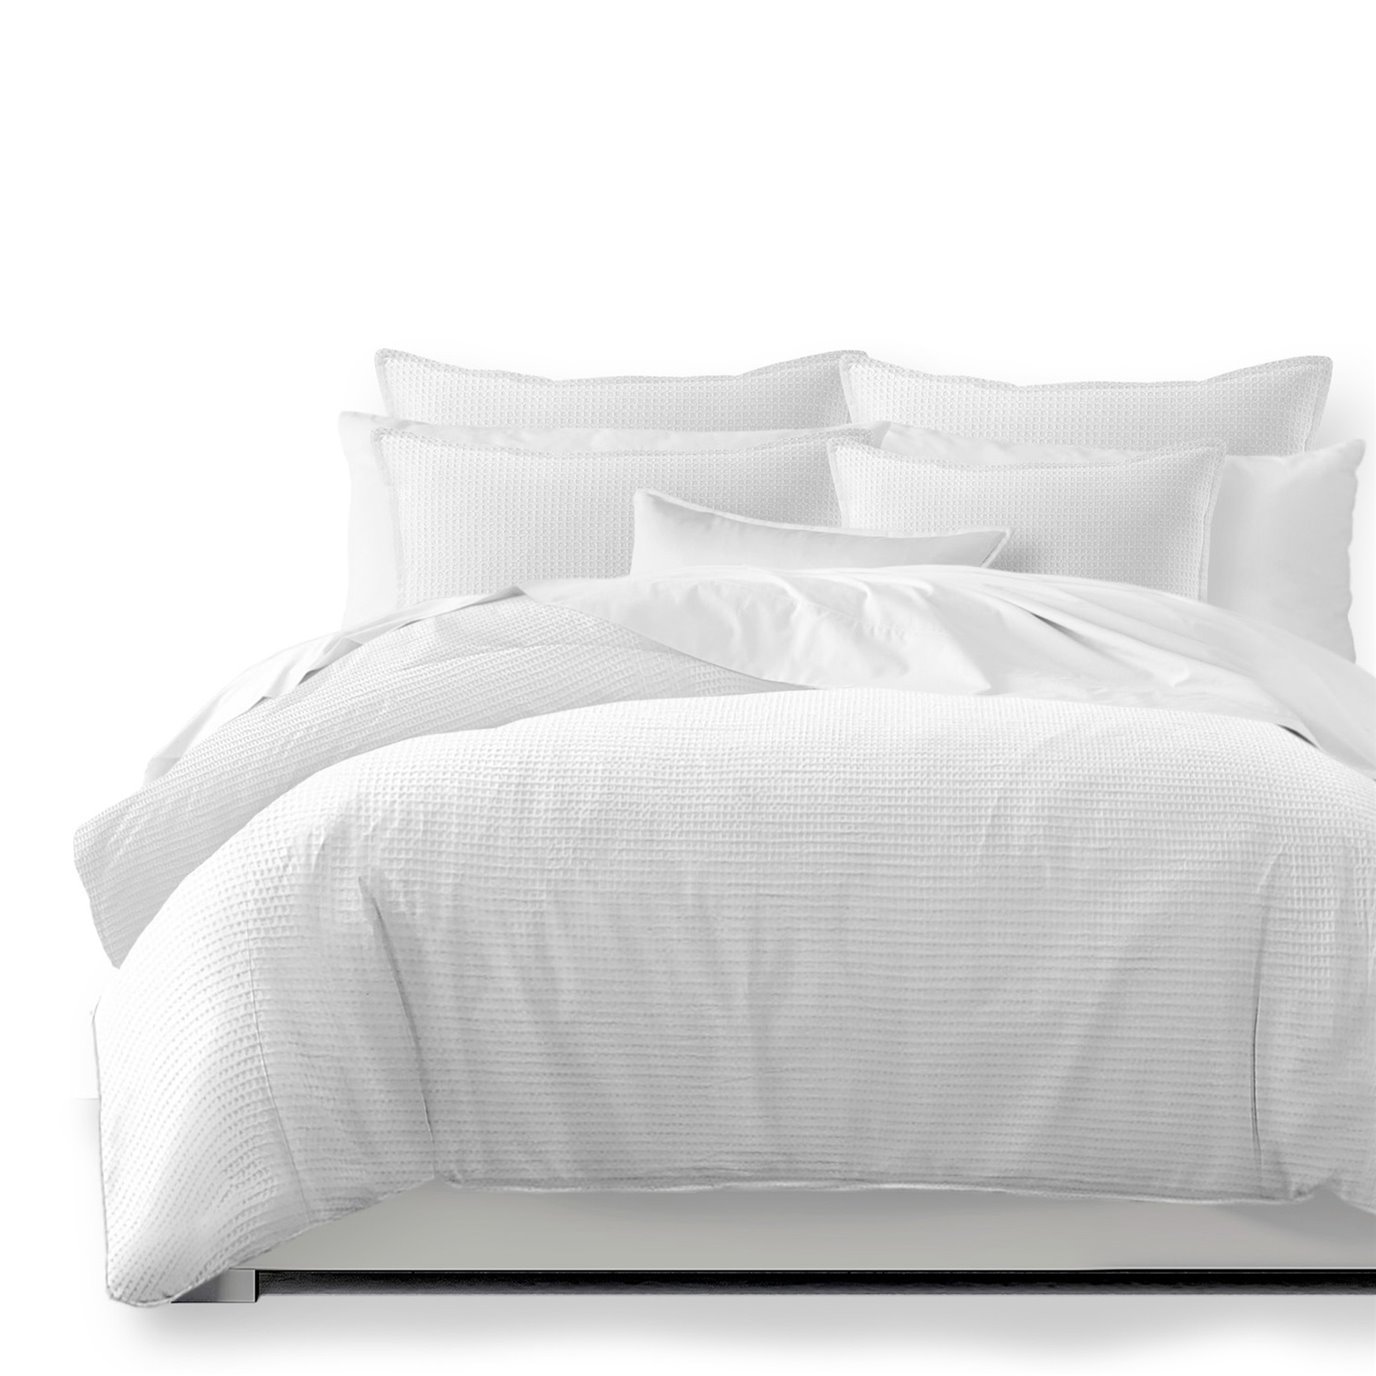 Classic Waffle White Comforter and Pillow Sham(s) Set - Size Twin